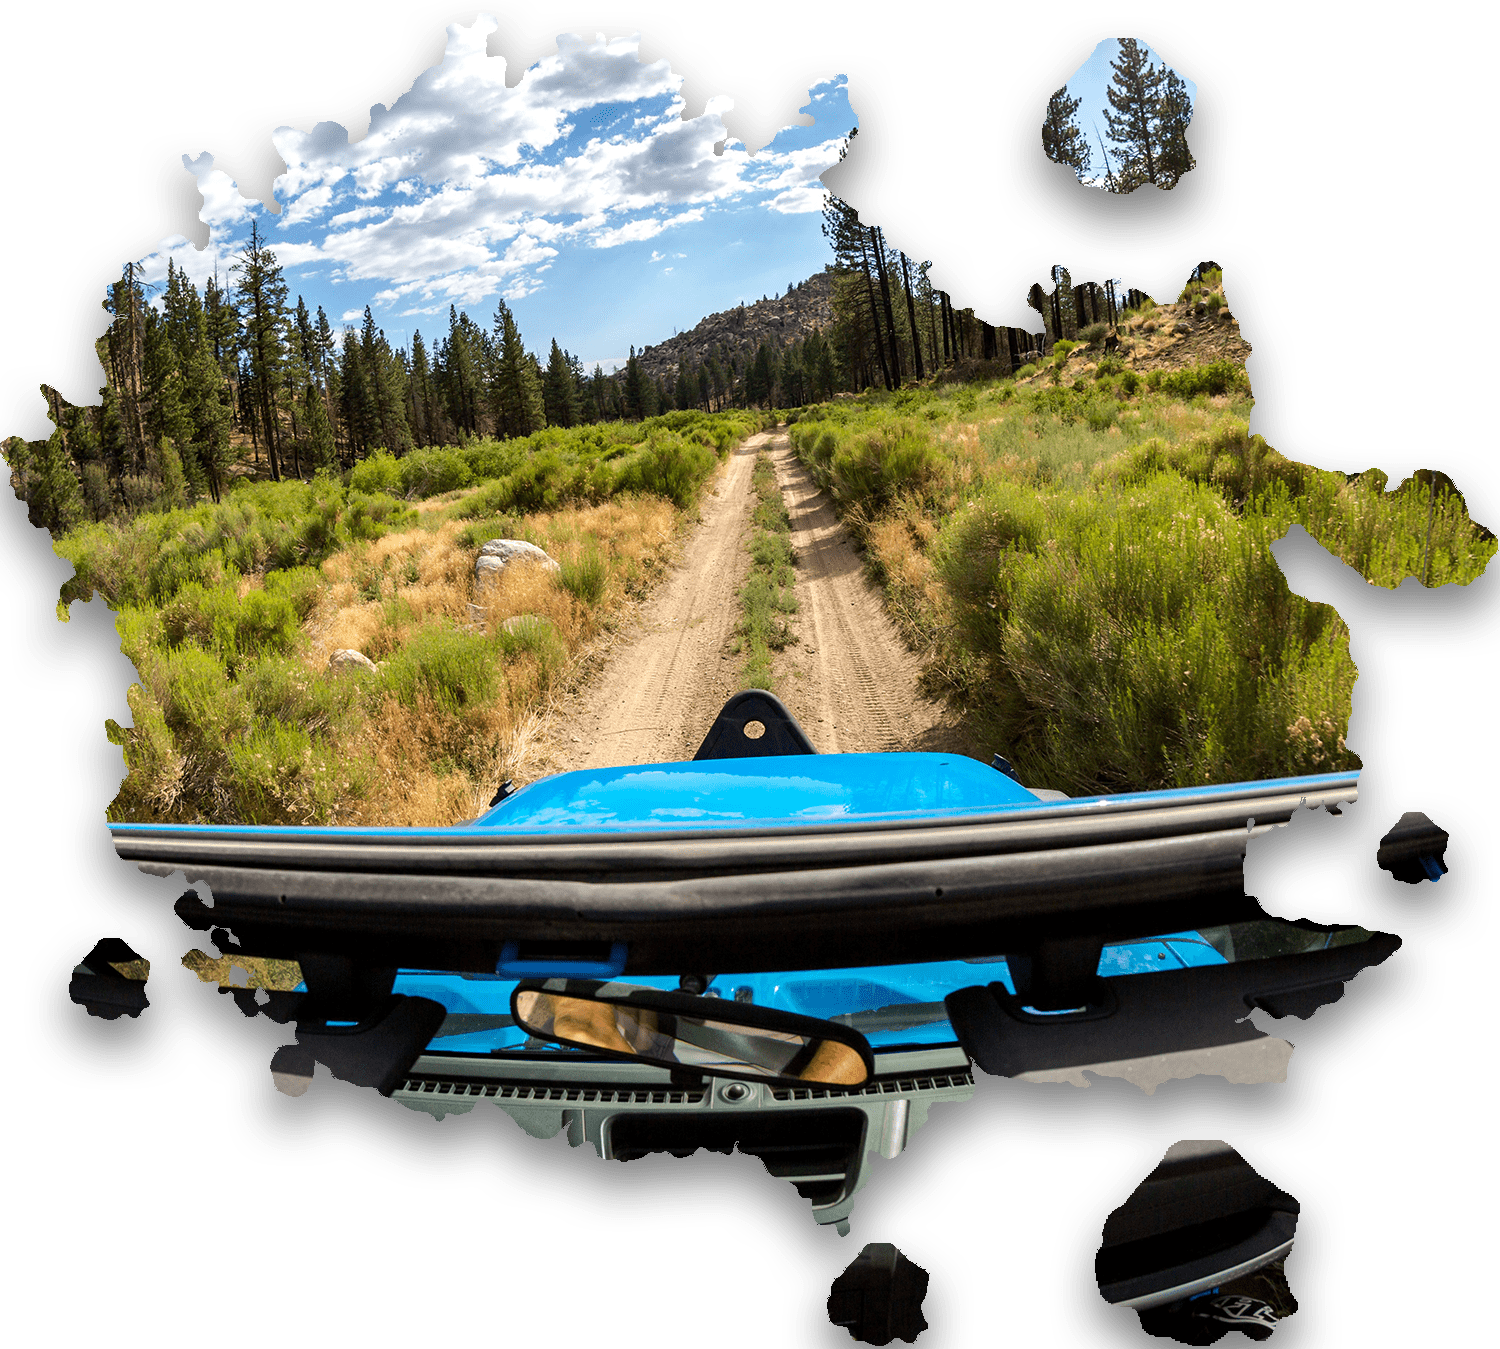 Driver's view from jeep on trail